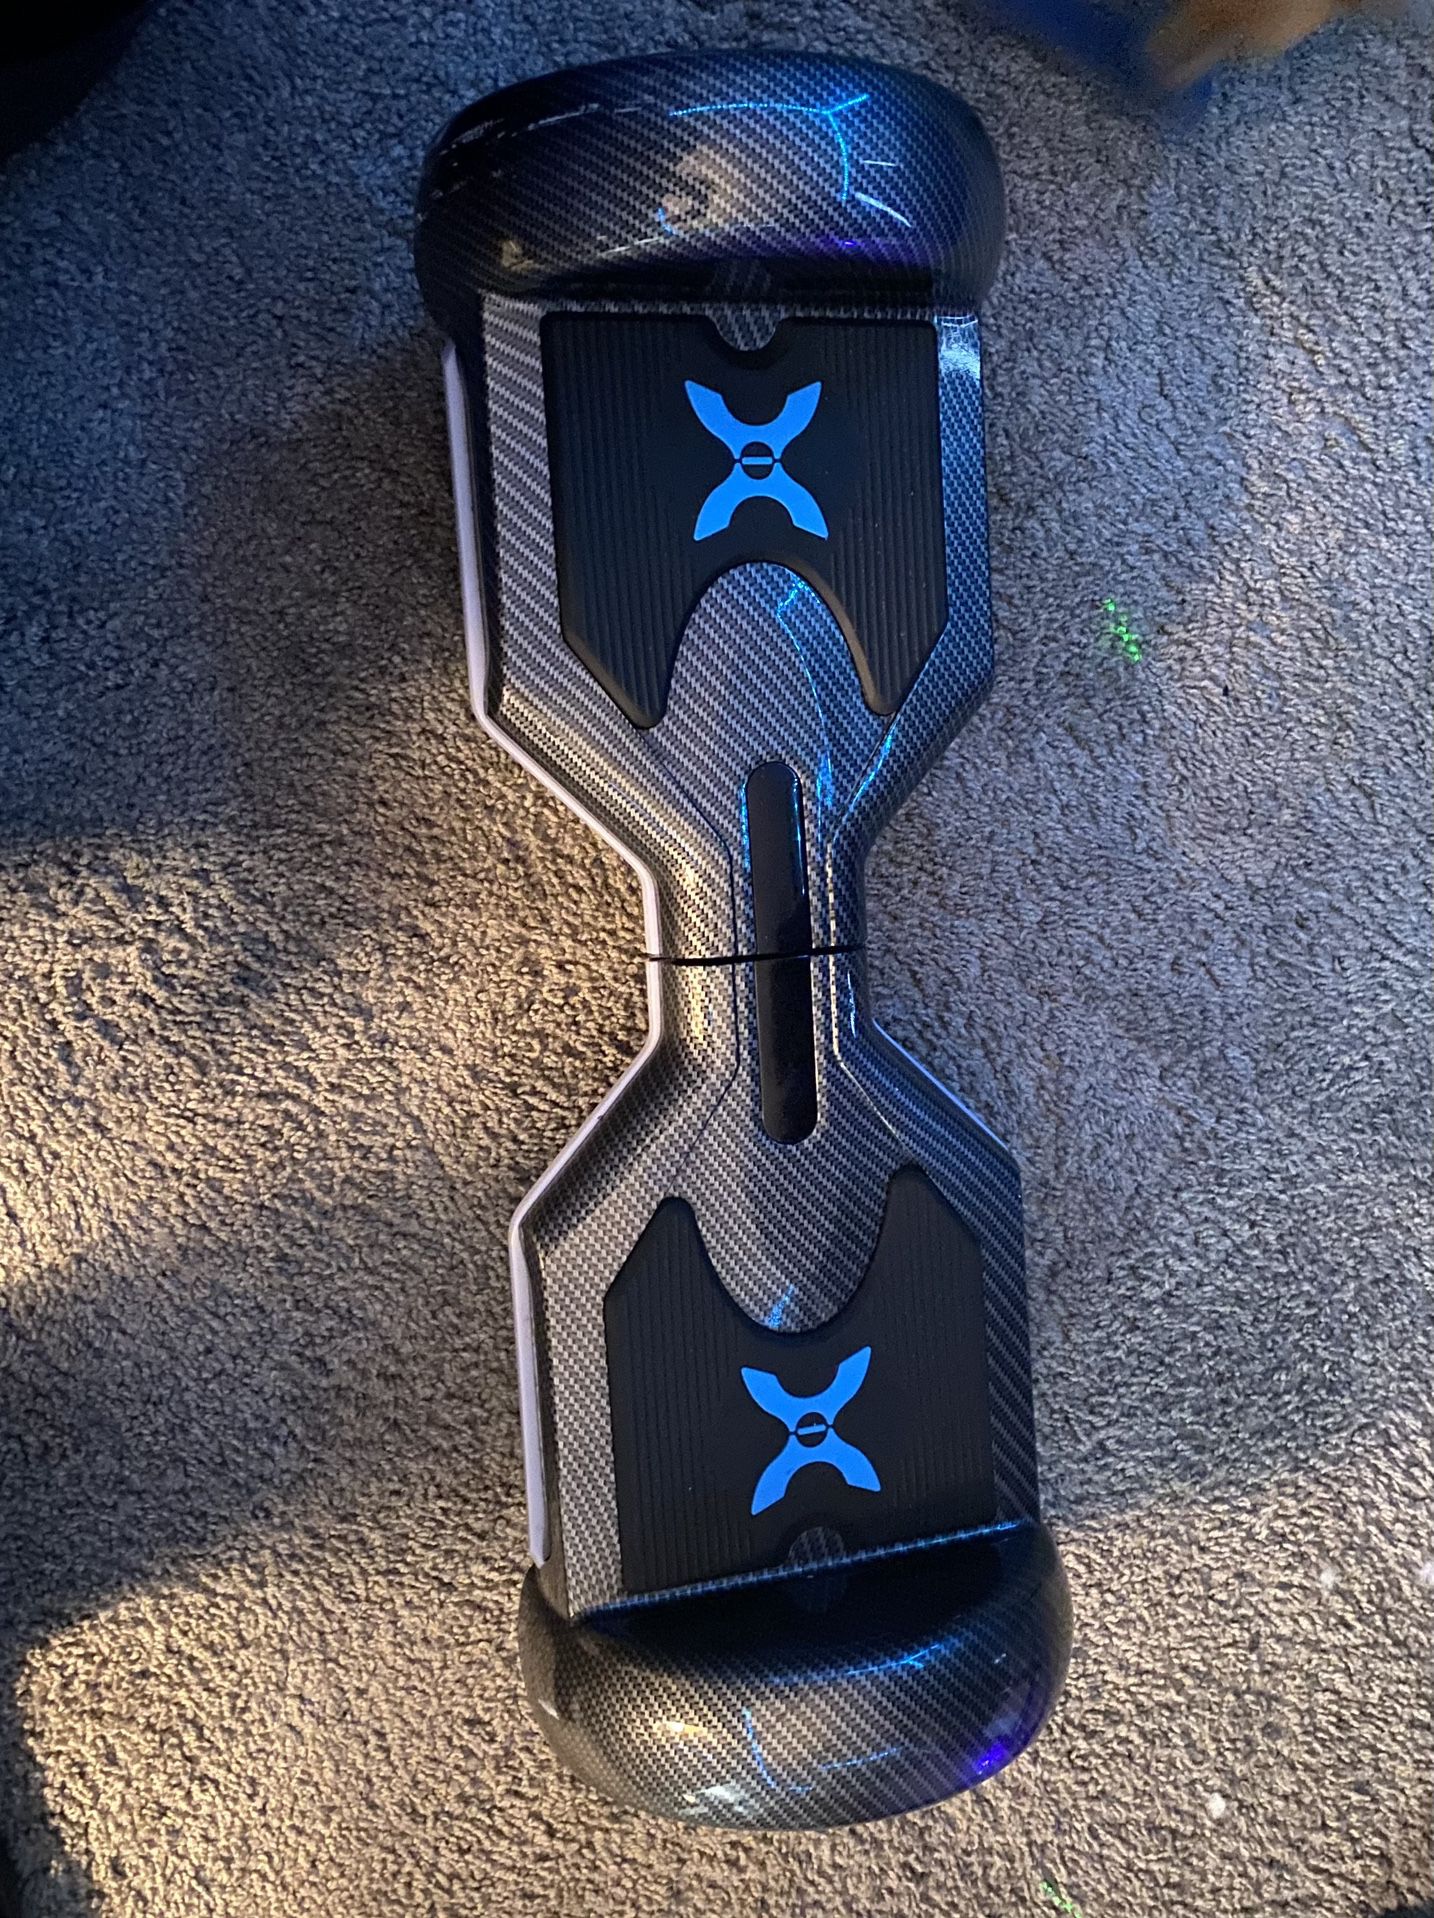 Bluetooth Hoverboard-1